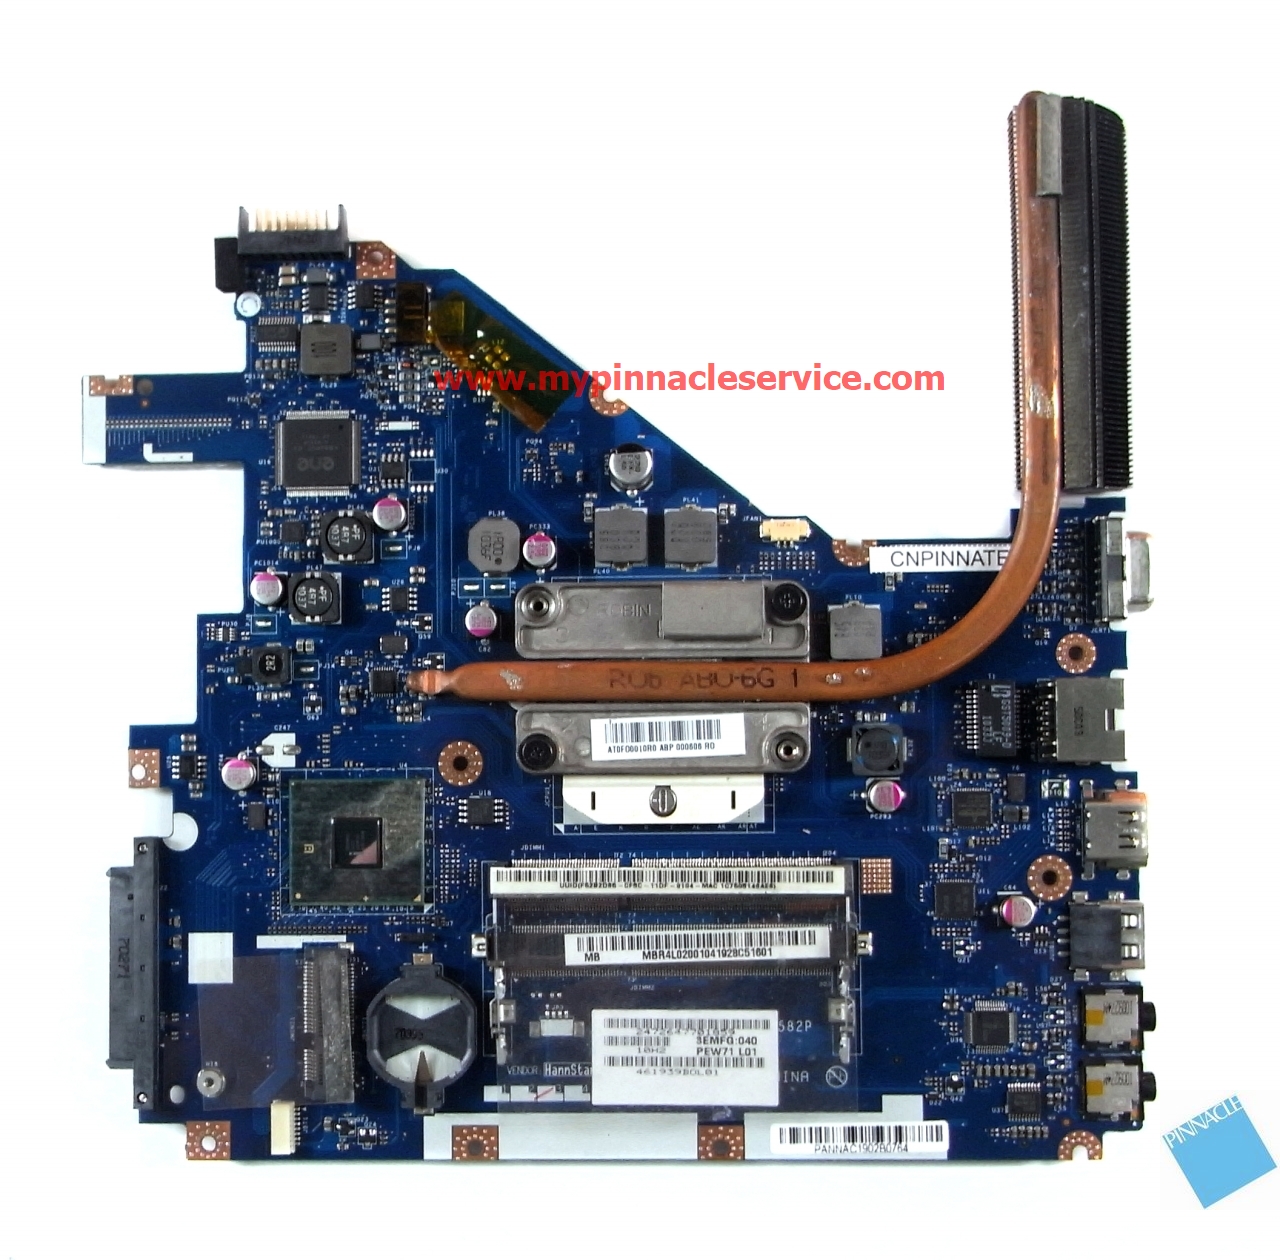 mbr4l02001-with-heatsink-and-i3-cpu-motherboard-for-acer-aspire-5742-la-6582p-instead-of-5552-la-6552p-mbr4602001-rimg0013.jpg